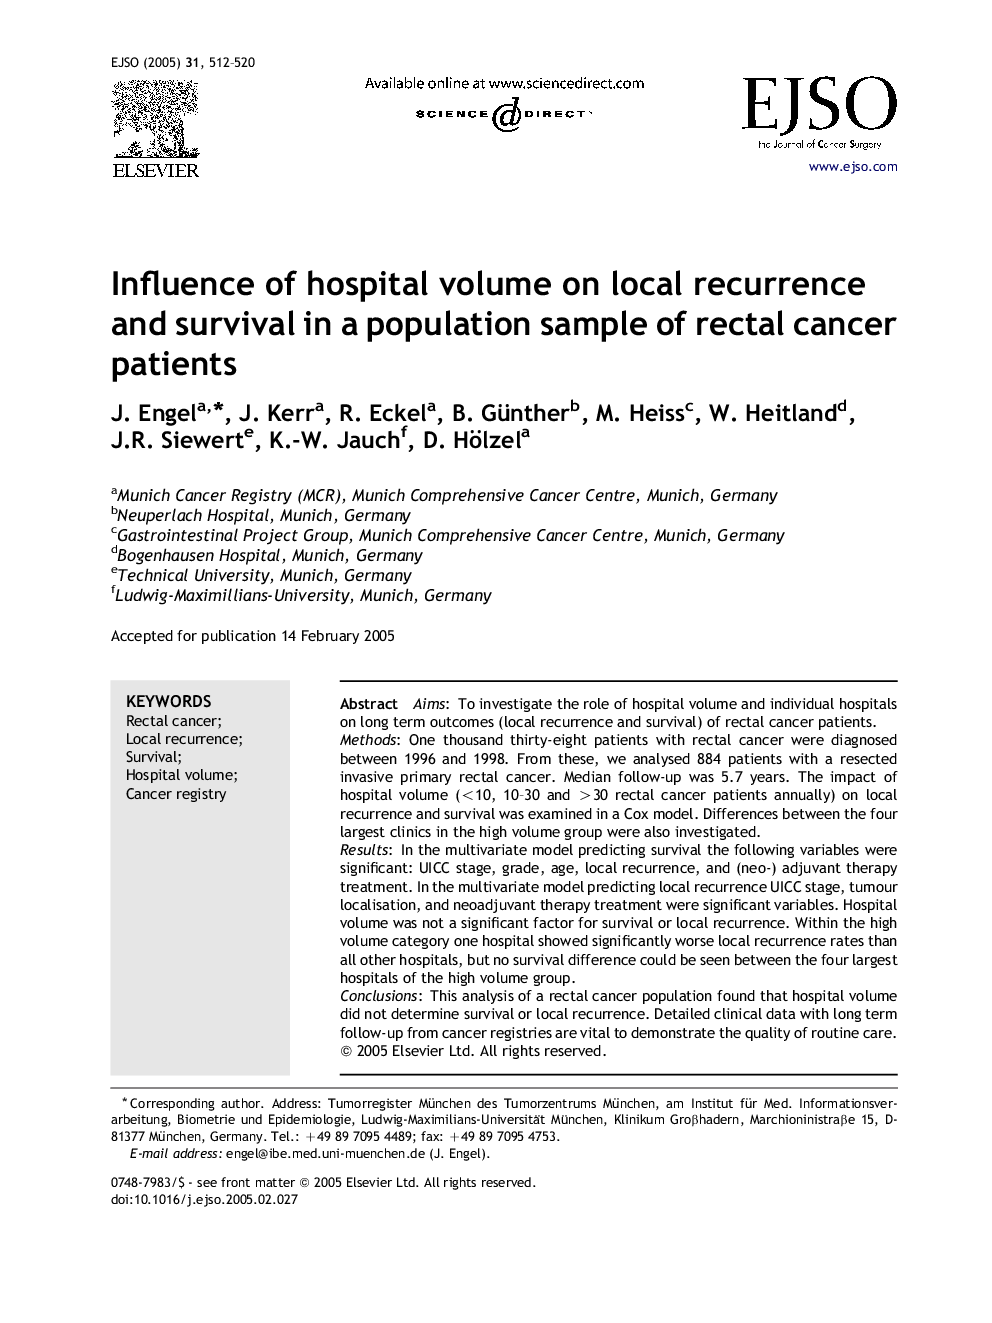 Influence of hospital volume on local recurrence and survival in a population sample of rectal cancer patients